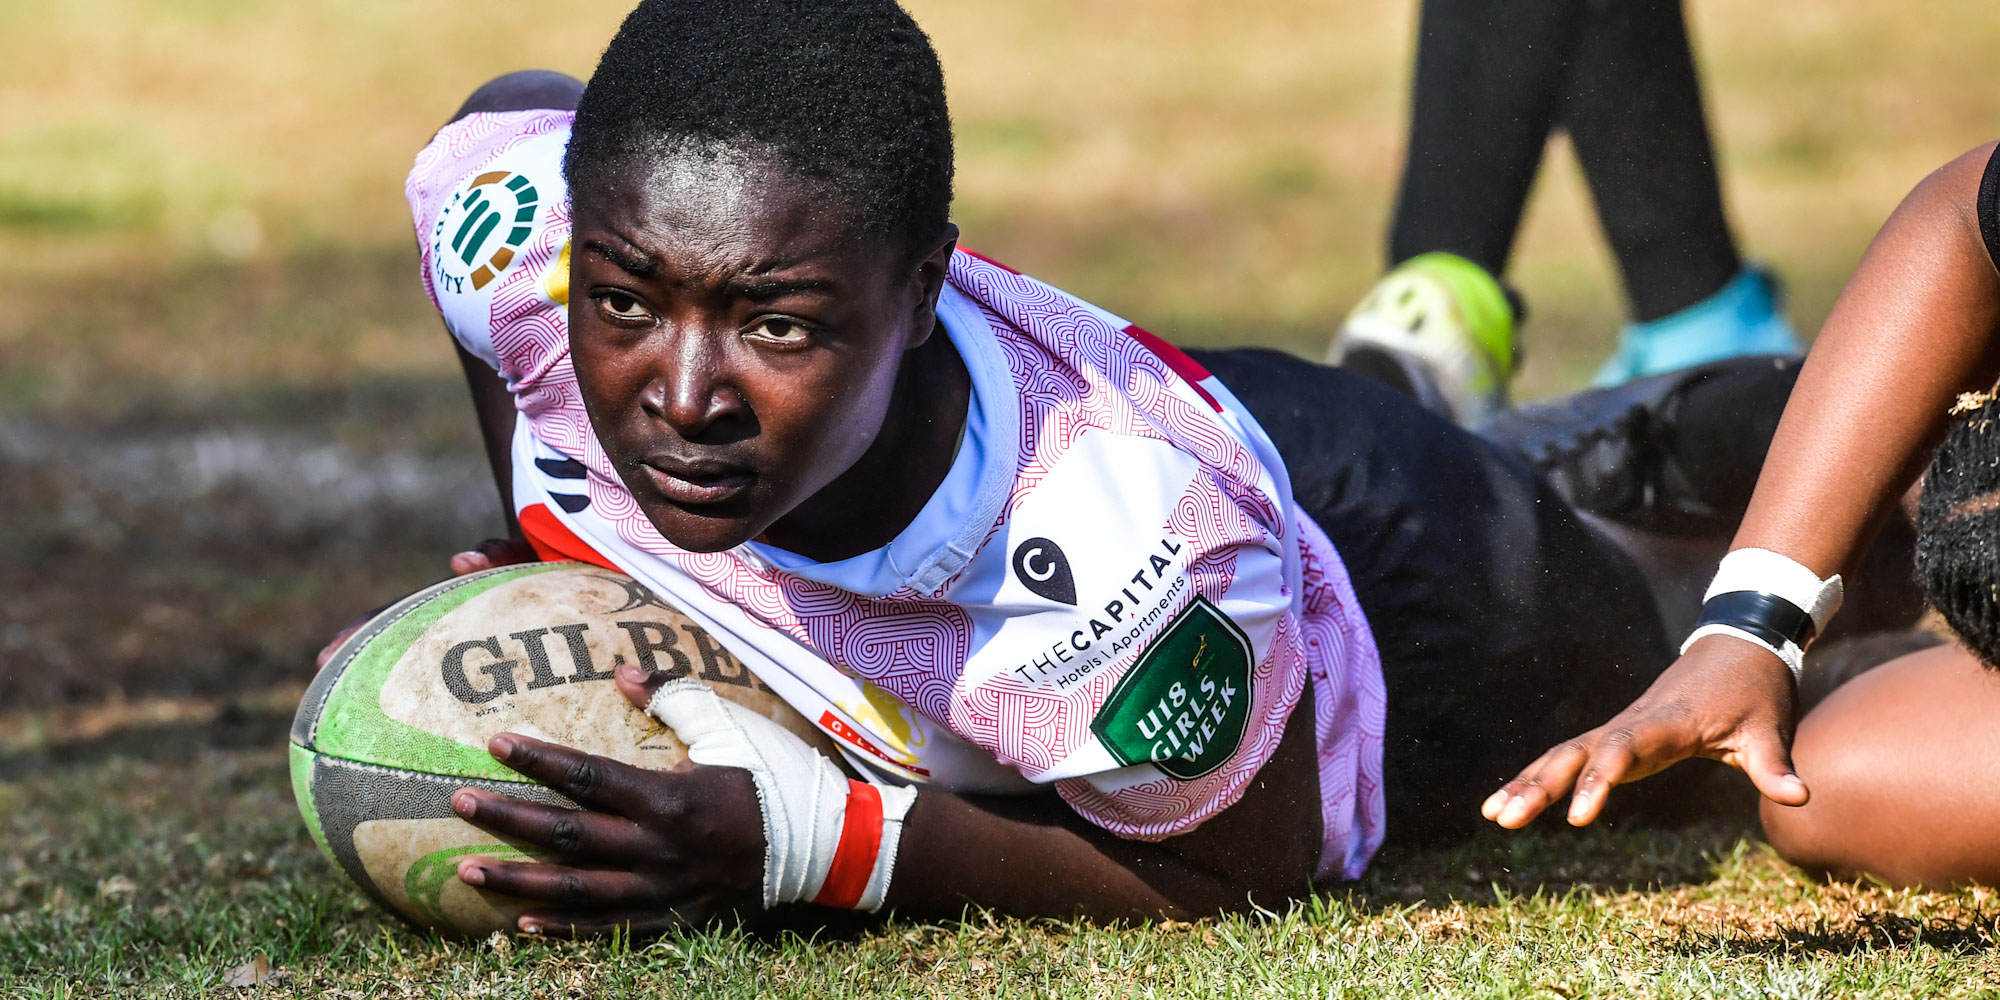 Stella Ncube scores a try for the Golden Lions during last year's U18 Girls Week in Johannesburg.